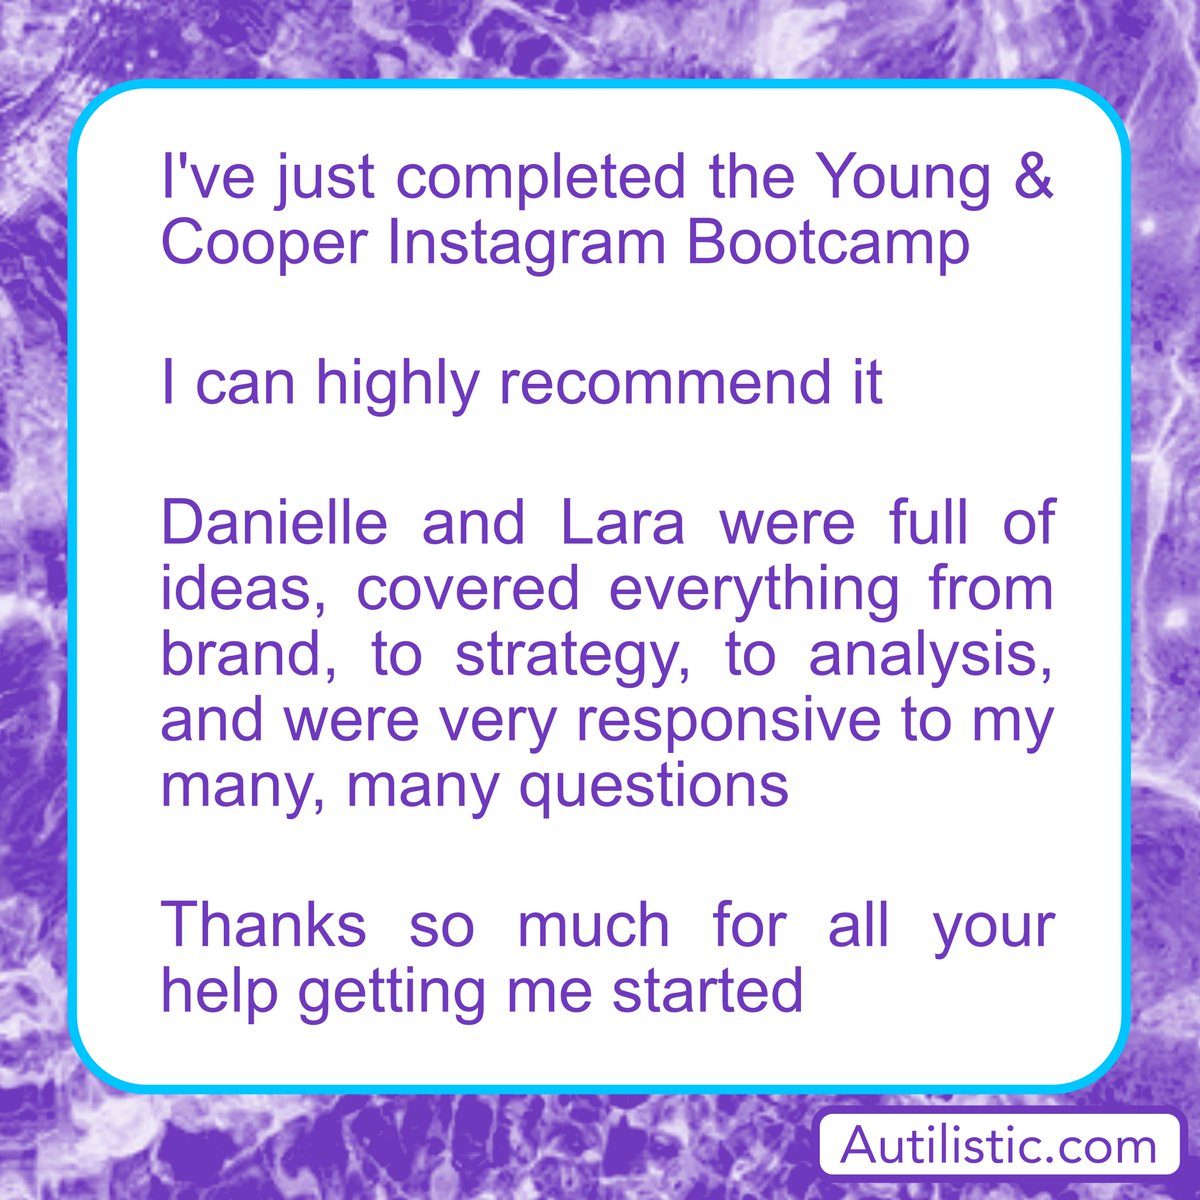 Need help getting to grips with Instagram, I've just completed Young & Coopers Bootcamp - fantastic!
Autilistic.com #autism #autistic #actuallyautistic #autismadvocate #autisticadults #autismparents #autisticwomen #autismlife #autismsupport #neurodiversity